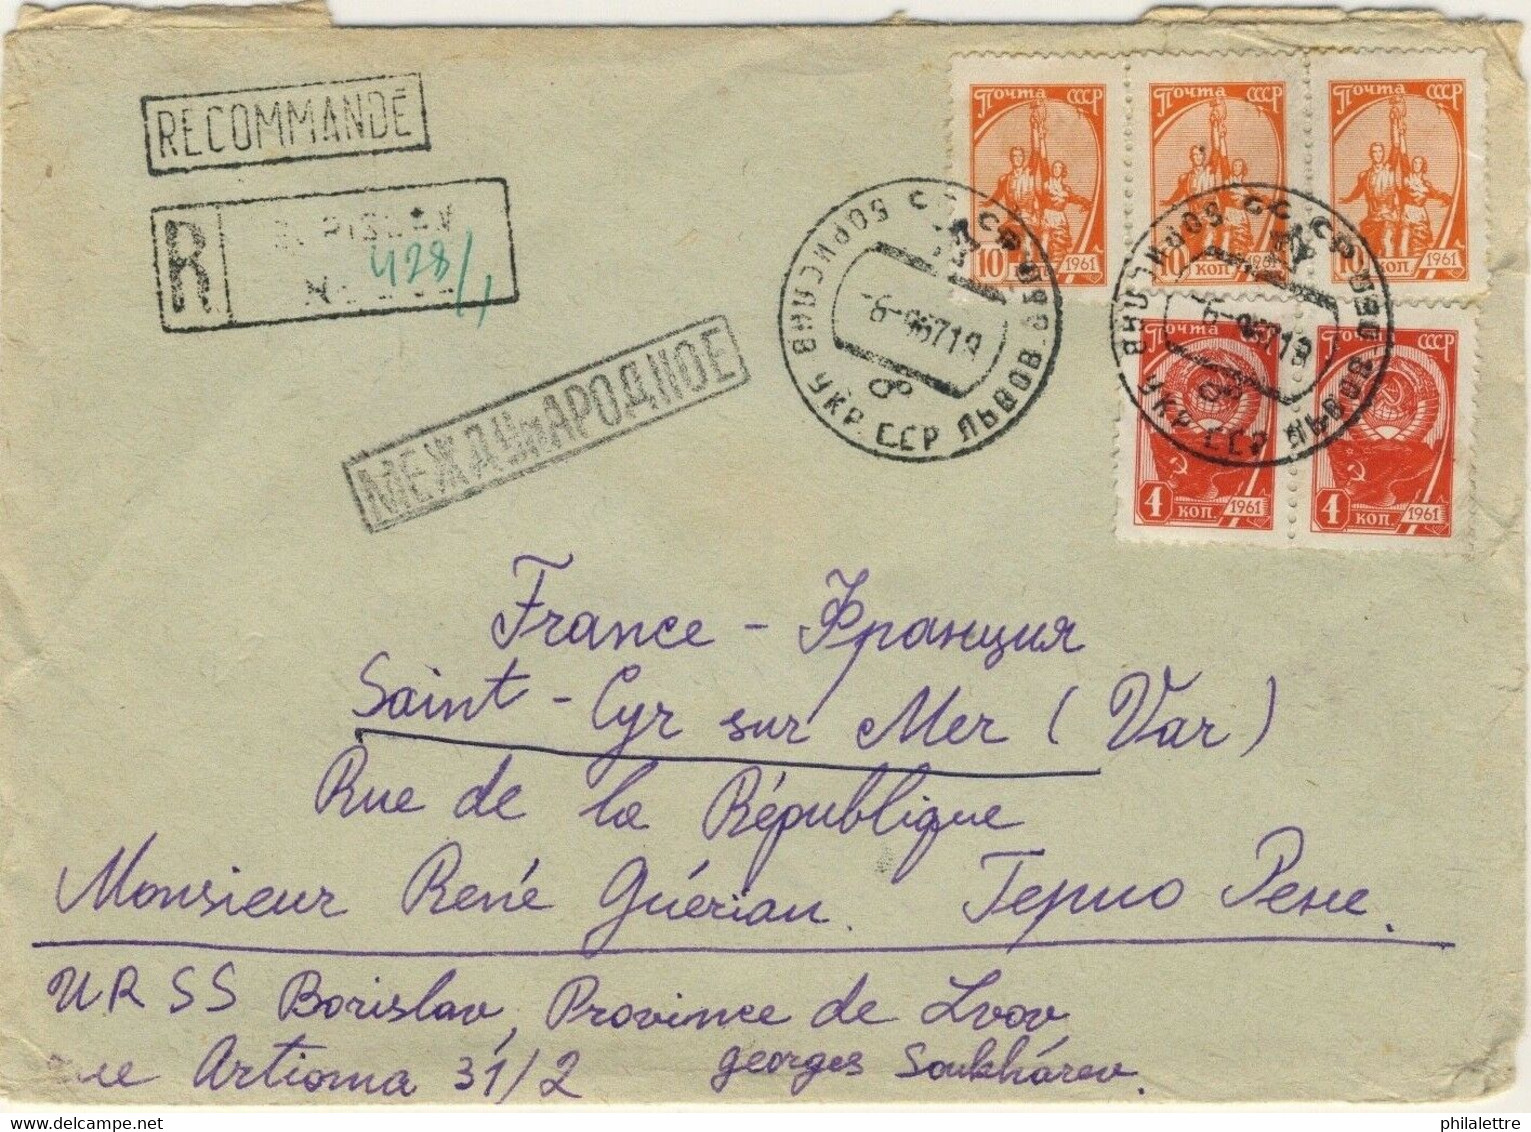 URSS Soviet Union 1967 Mi.2437x (x2) & 2439x (x3) On Registered Cover To France - Lettres & Documents